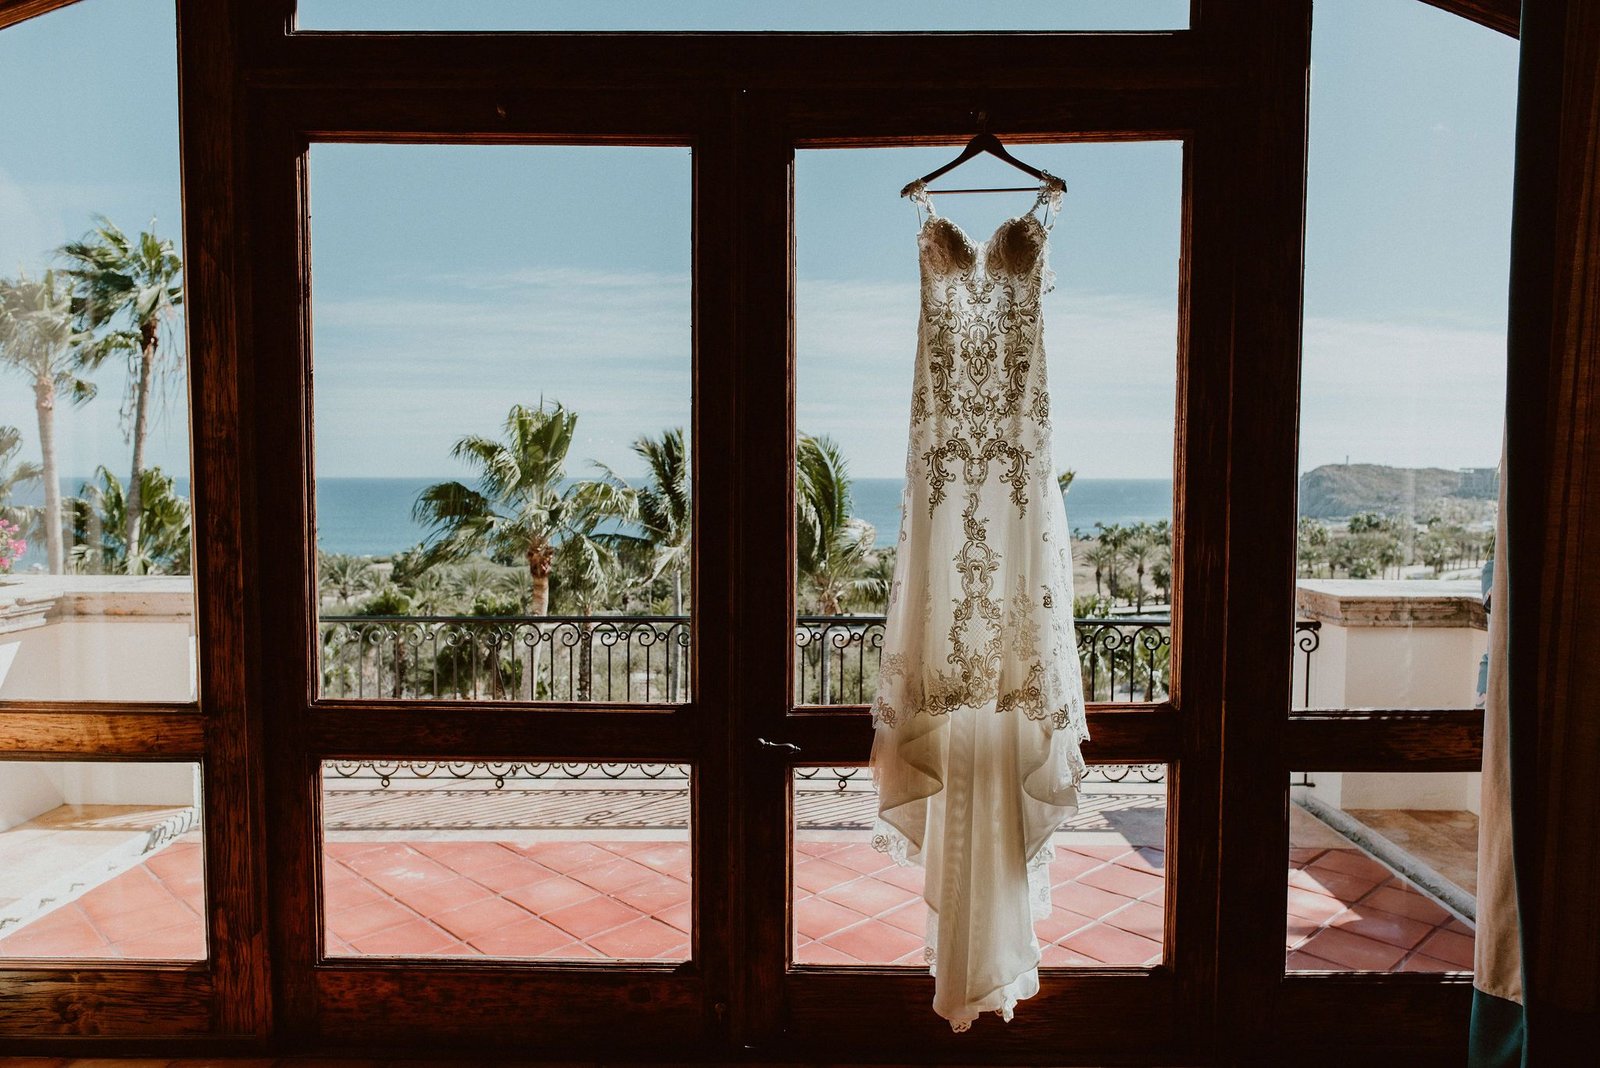 Bridal Dress hanging at Cabo del Sol for Destination Wedding in Los Cabos Mexico. Wedding Planning by Cabo Wedding Services. Wedding Photograohy by Ana and Jerome.  